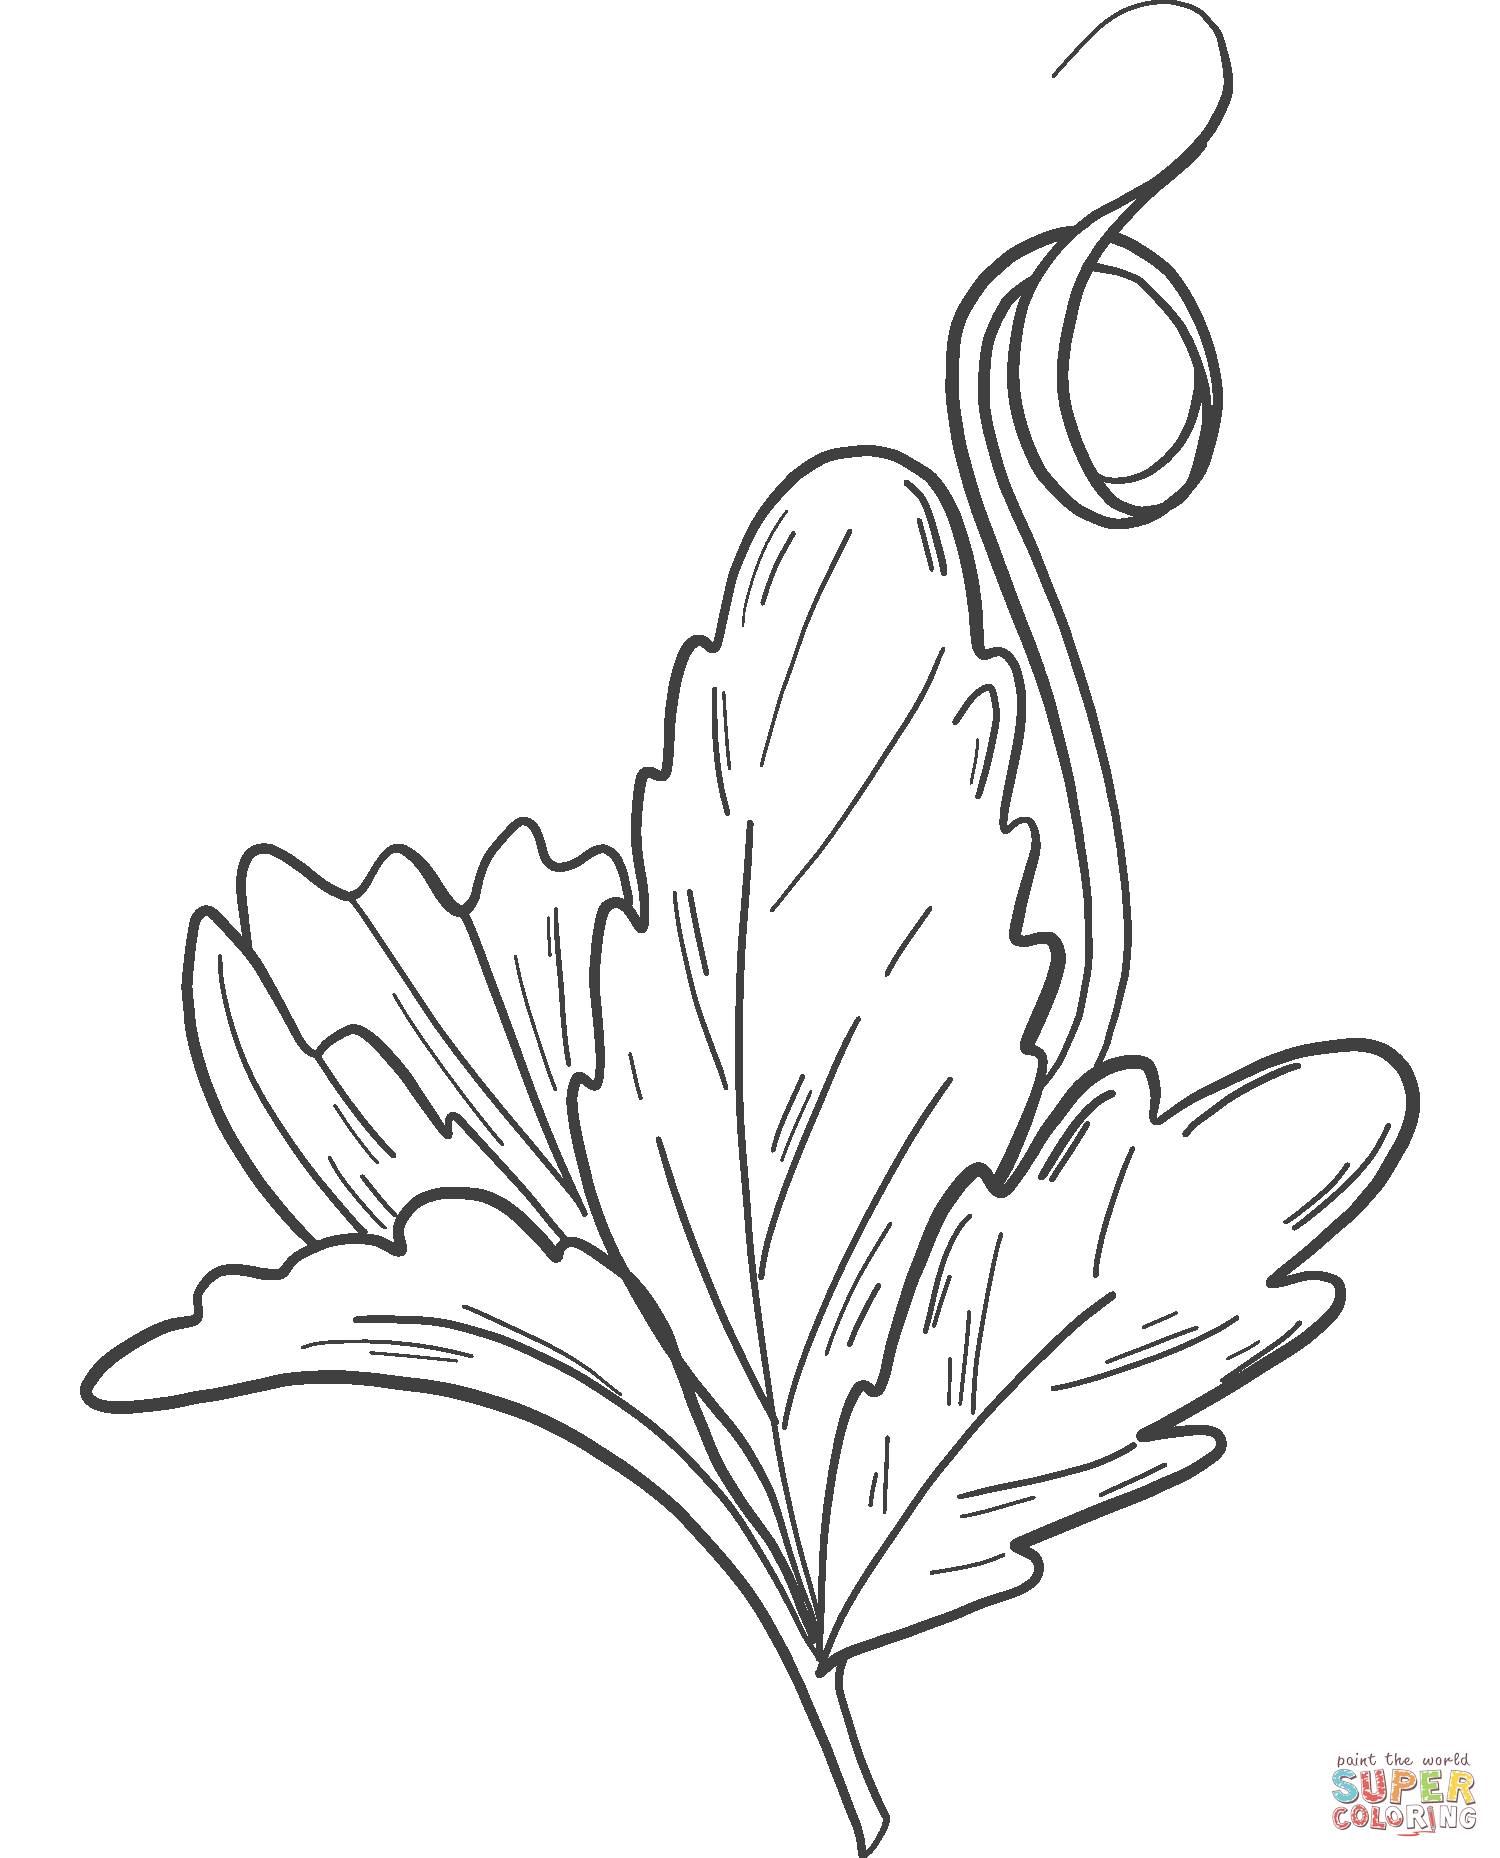 Pumpkin leaf coloring page free printable coloring pages